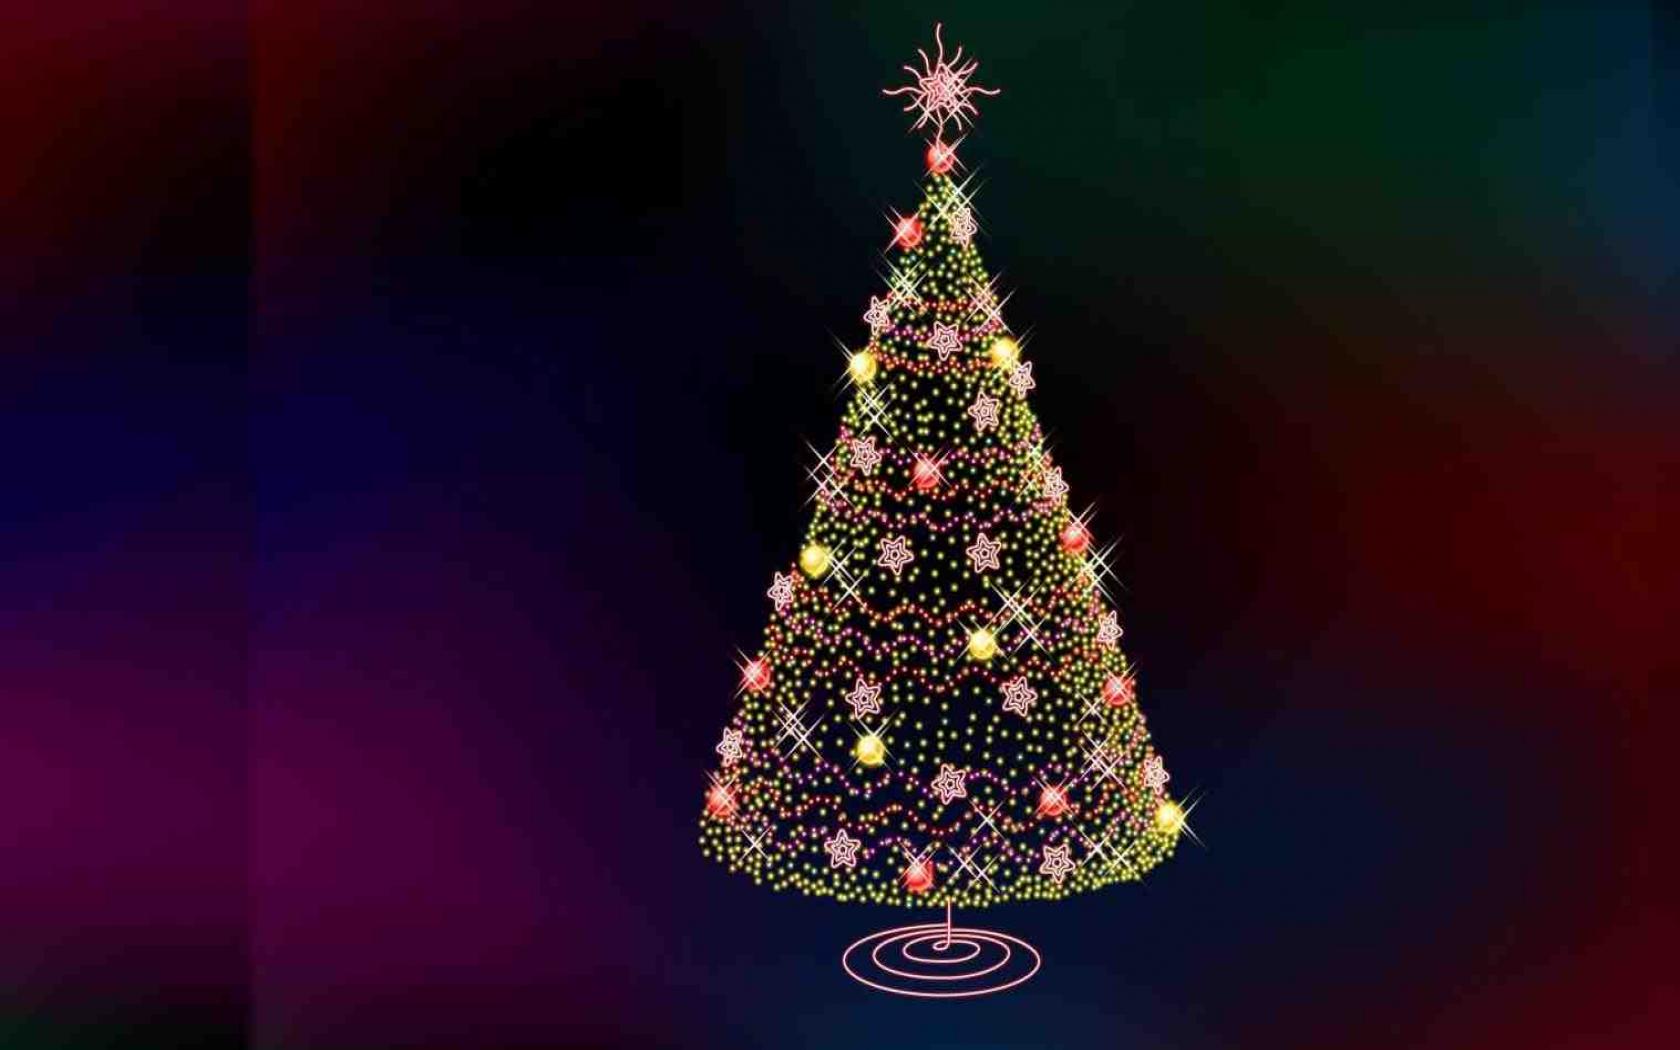 Animated Christmas Wallpaper For Mac - Christmas Tree Iphone 6 , HD Wallpaper & Backgrounds